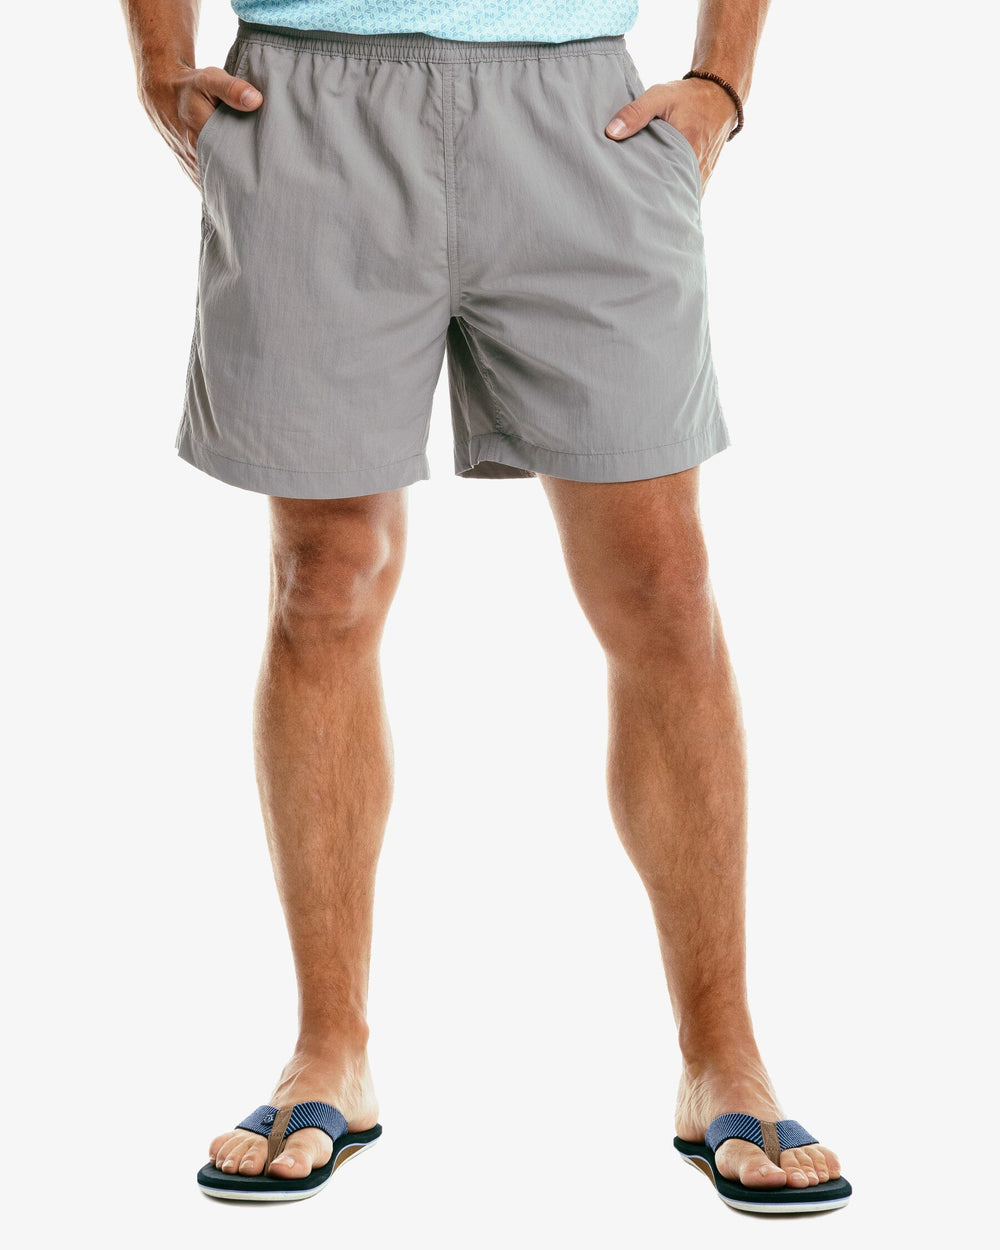 The model front view of the Men's Shoreline 6 Inch Short by Southern Tide  - Frost Grey